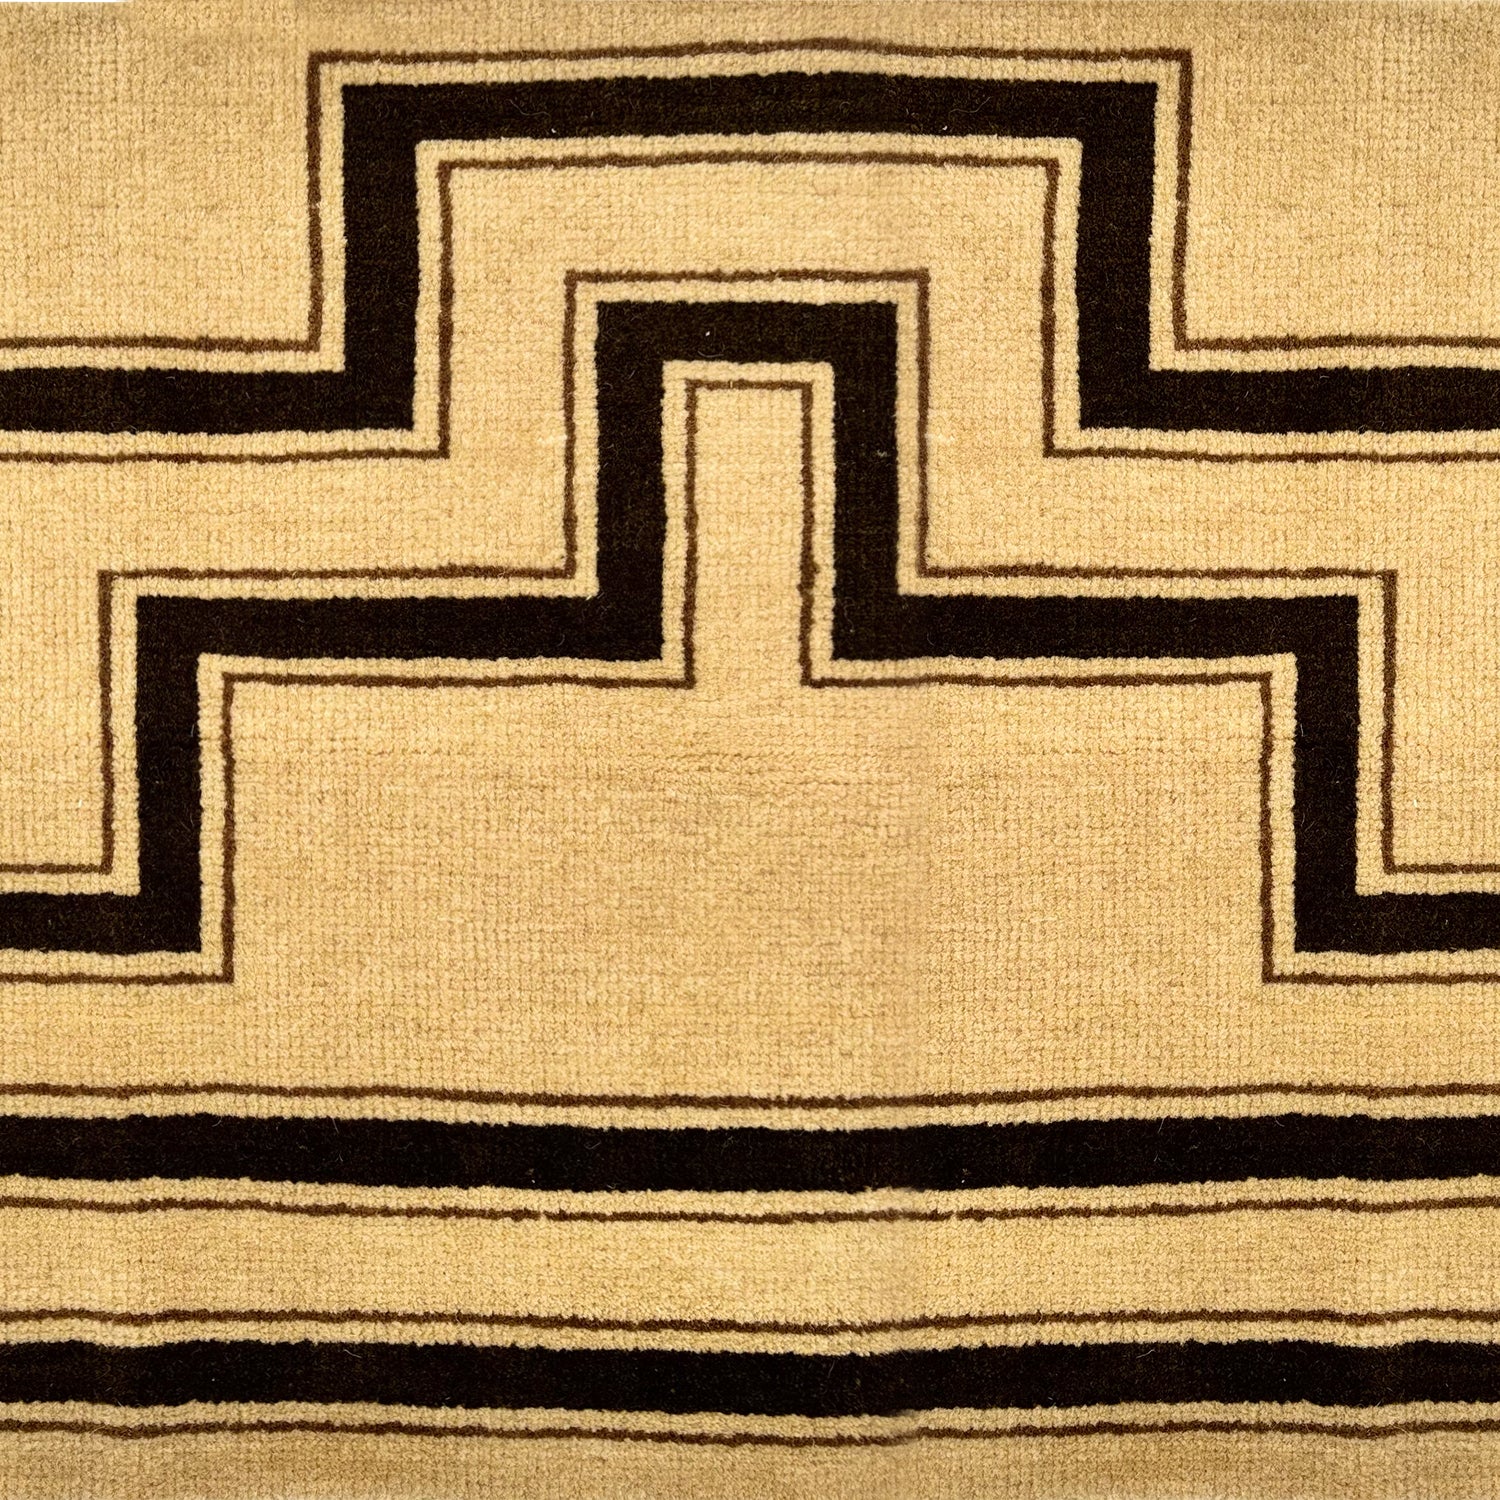 Detail of a handknotted rug with a geometric stripe pattern in brown on a cream field.